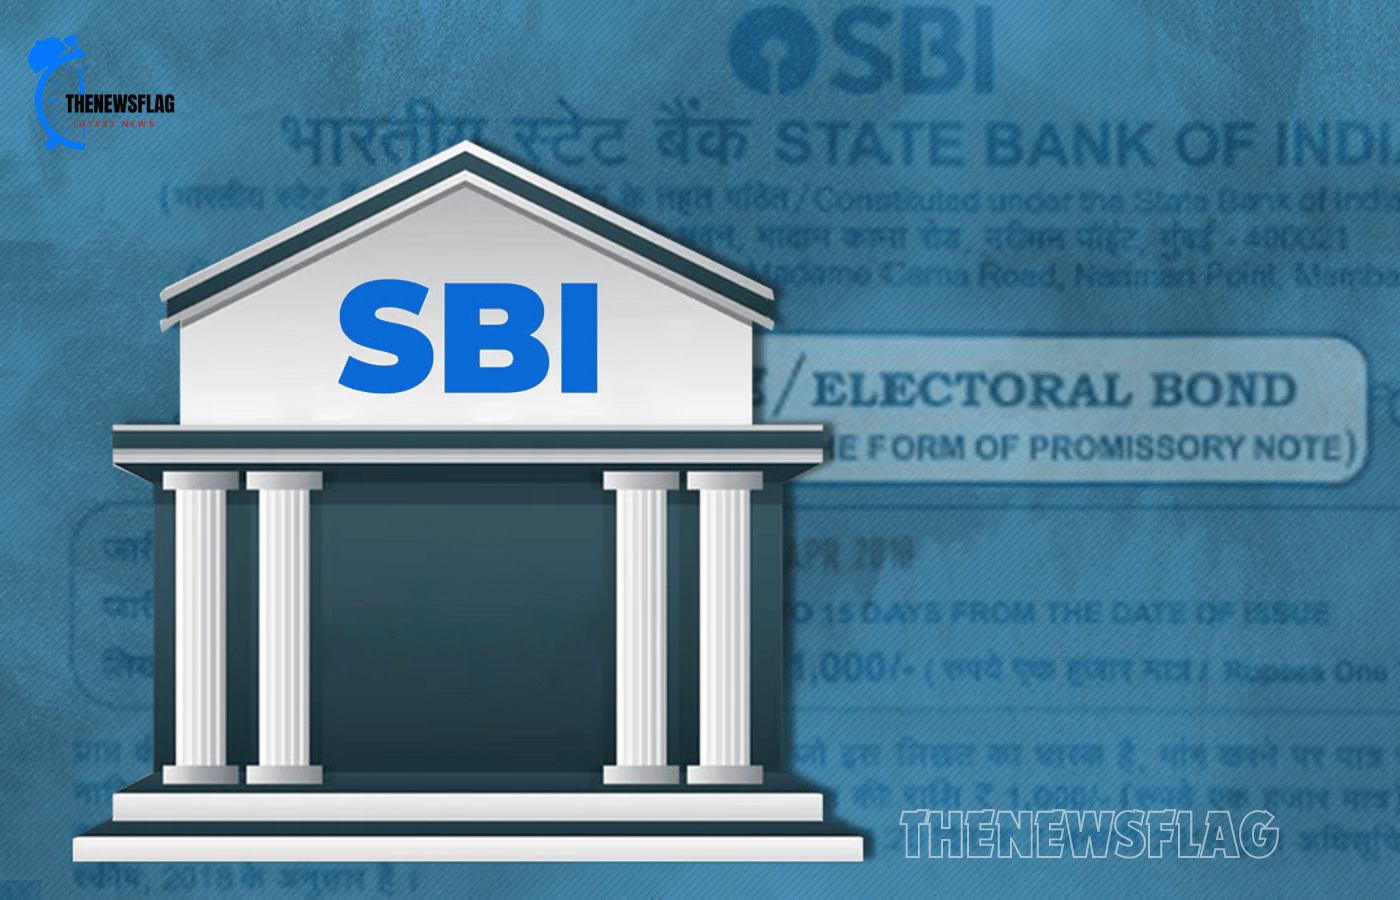 In the case of electoral bonds, the Supreme Court has ordered SBI to release a unique number that links political parties.